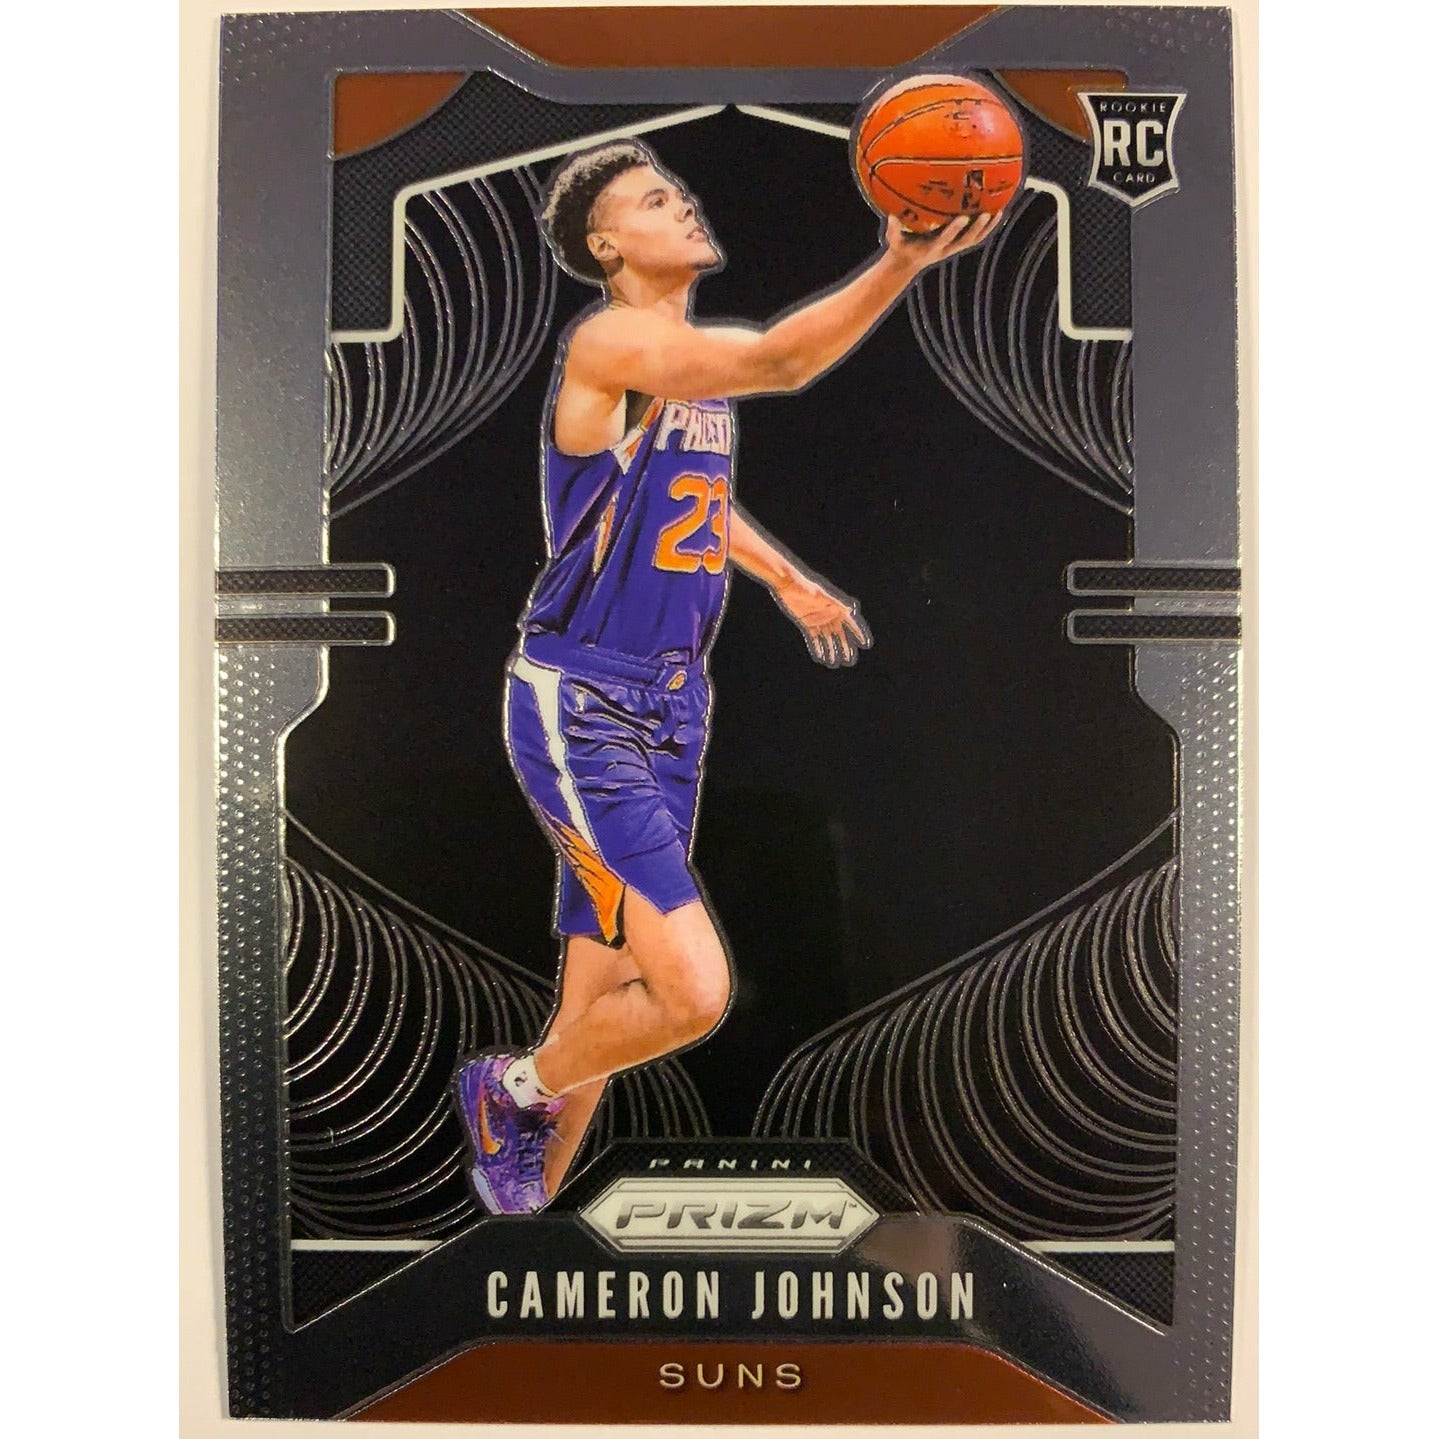  2019-20 Prizm Cameron Johnson RC  Local Legends Cards & Collectibles